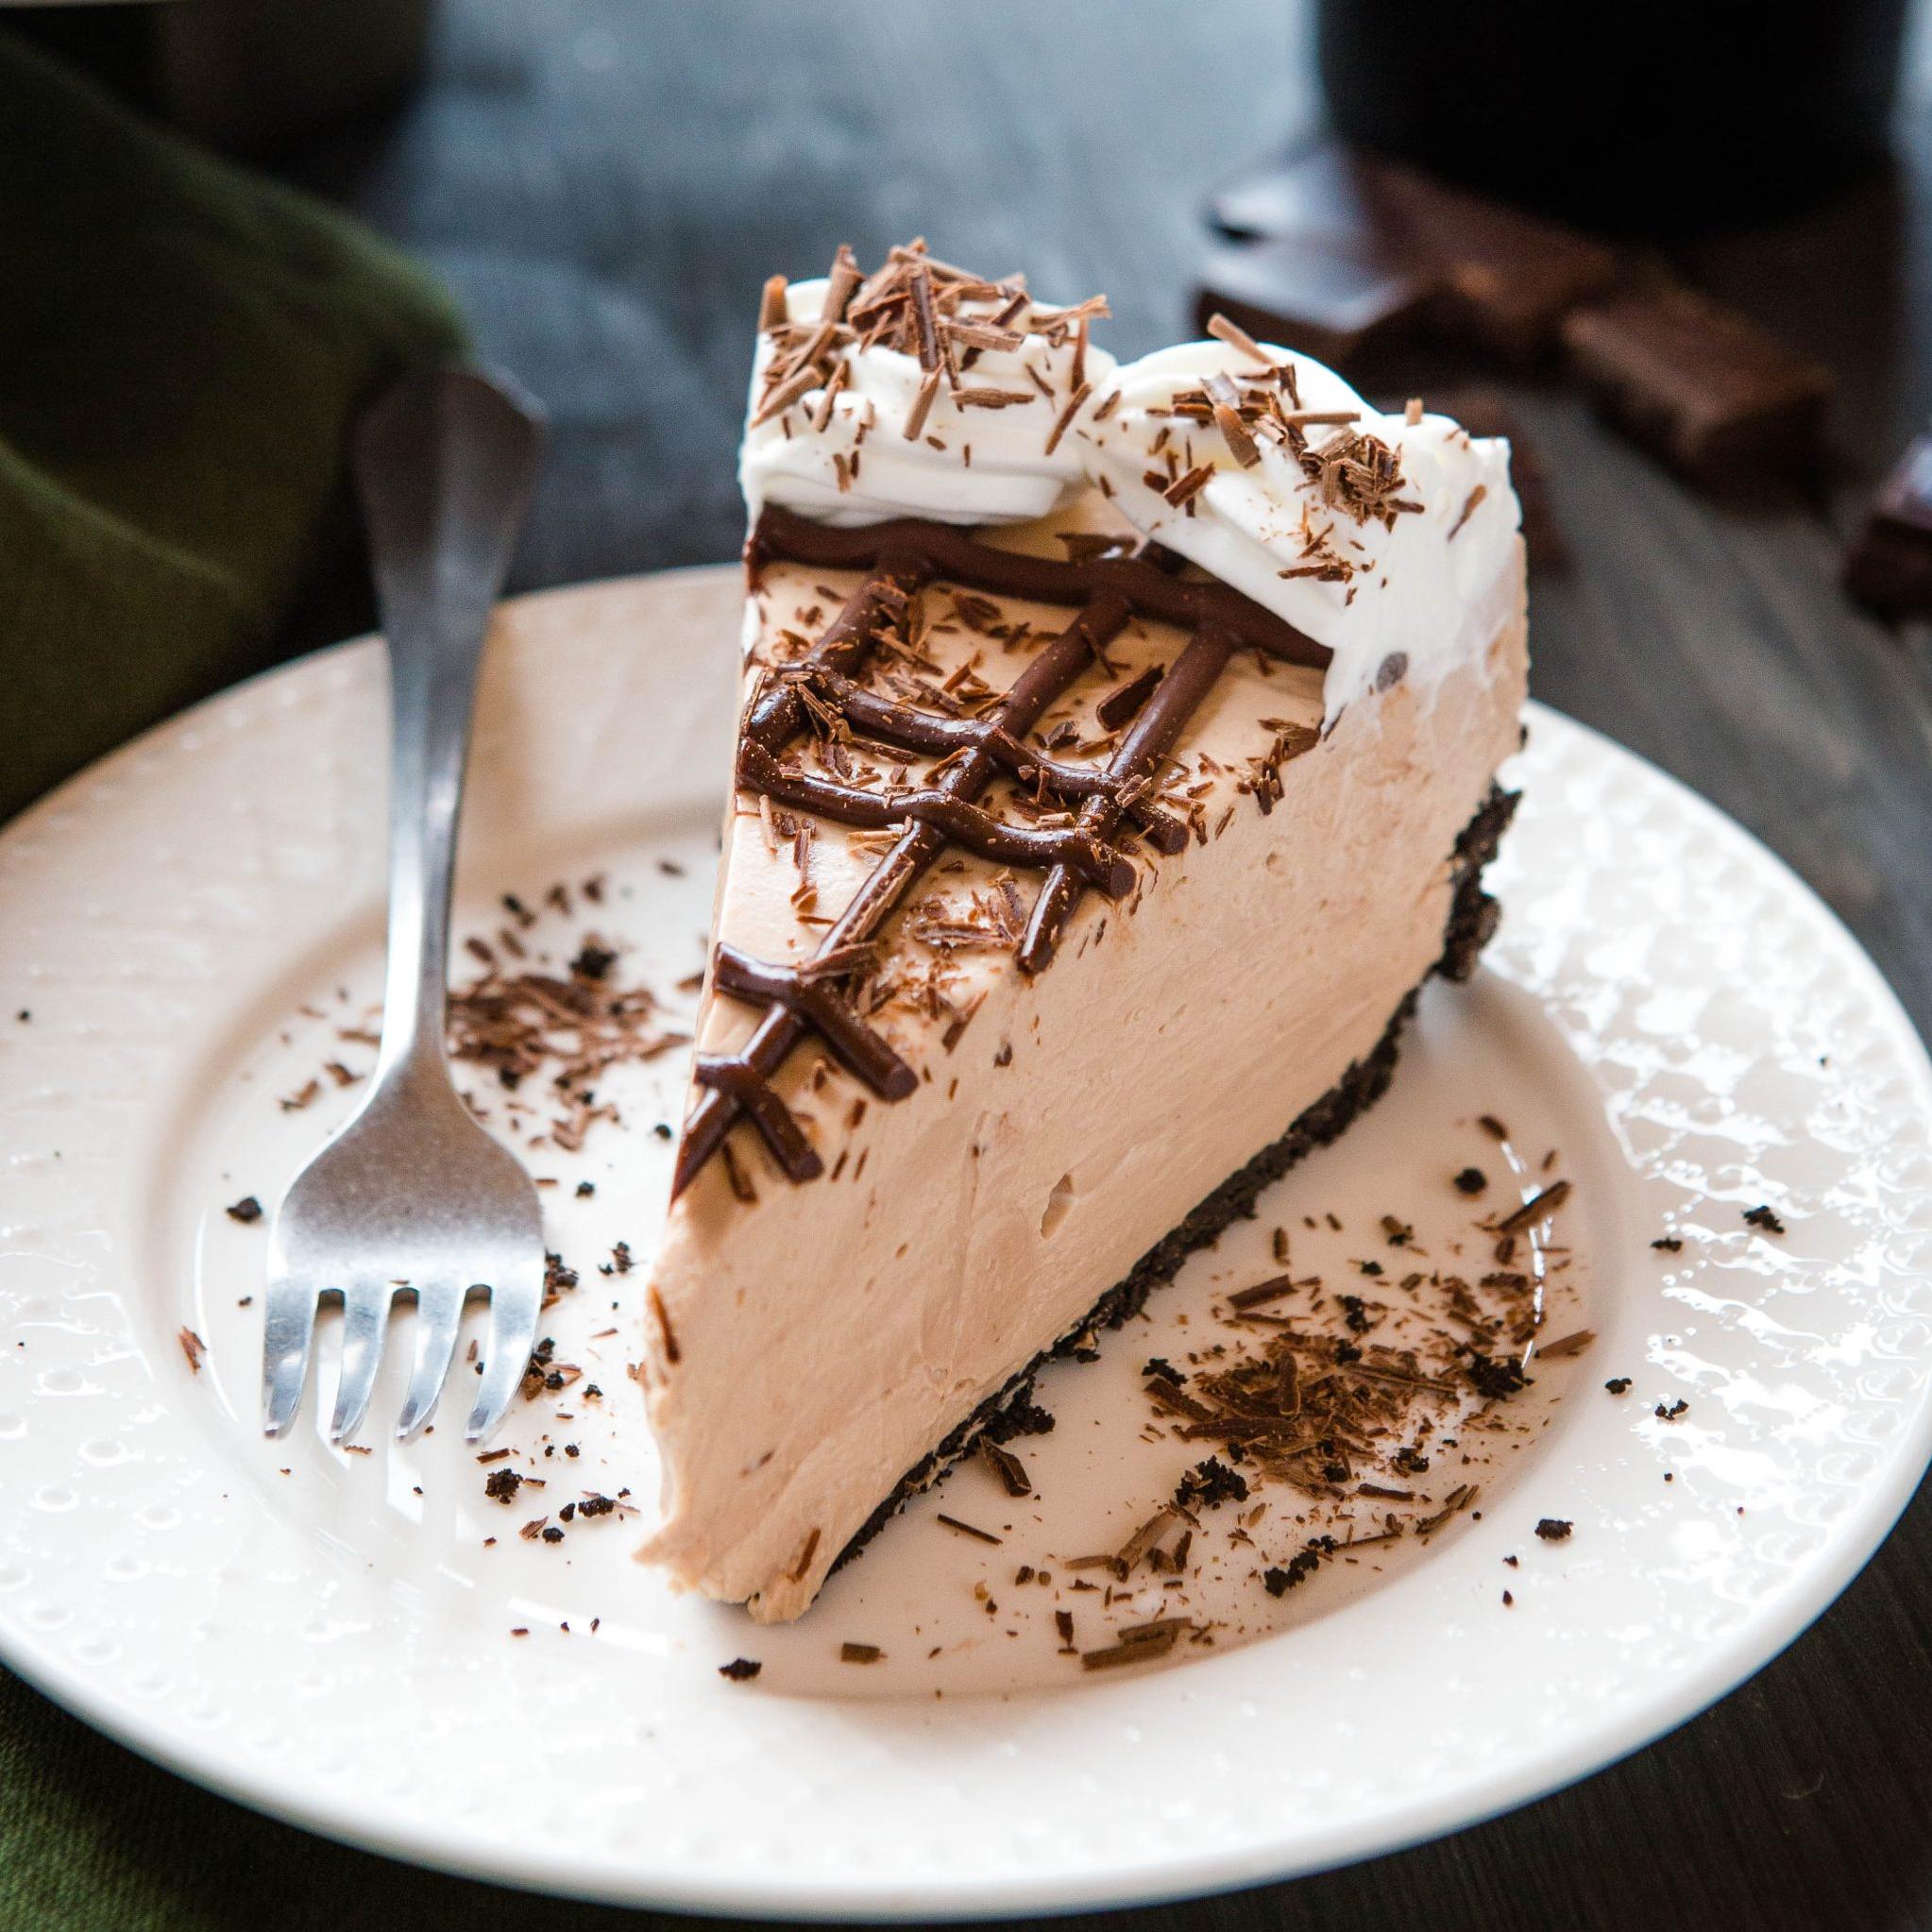  Get ready to indulge your sweet-tooth with this cheesecake goodness